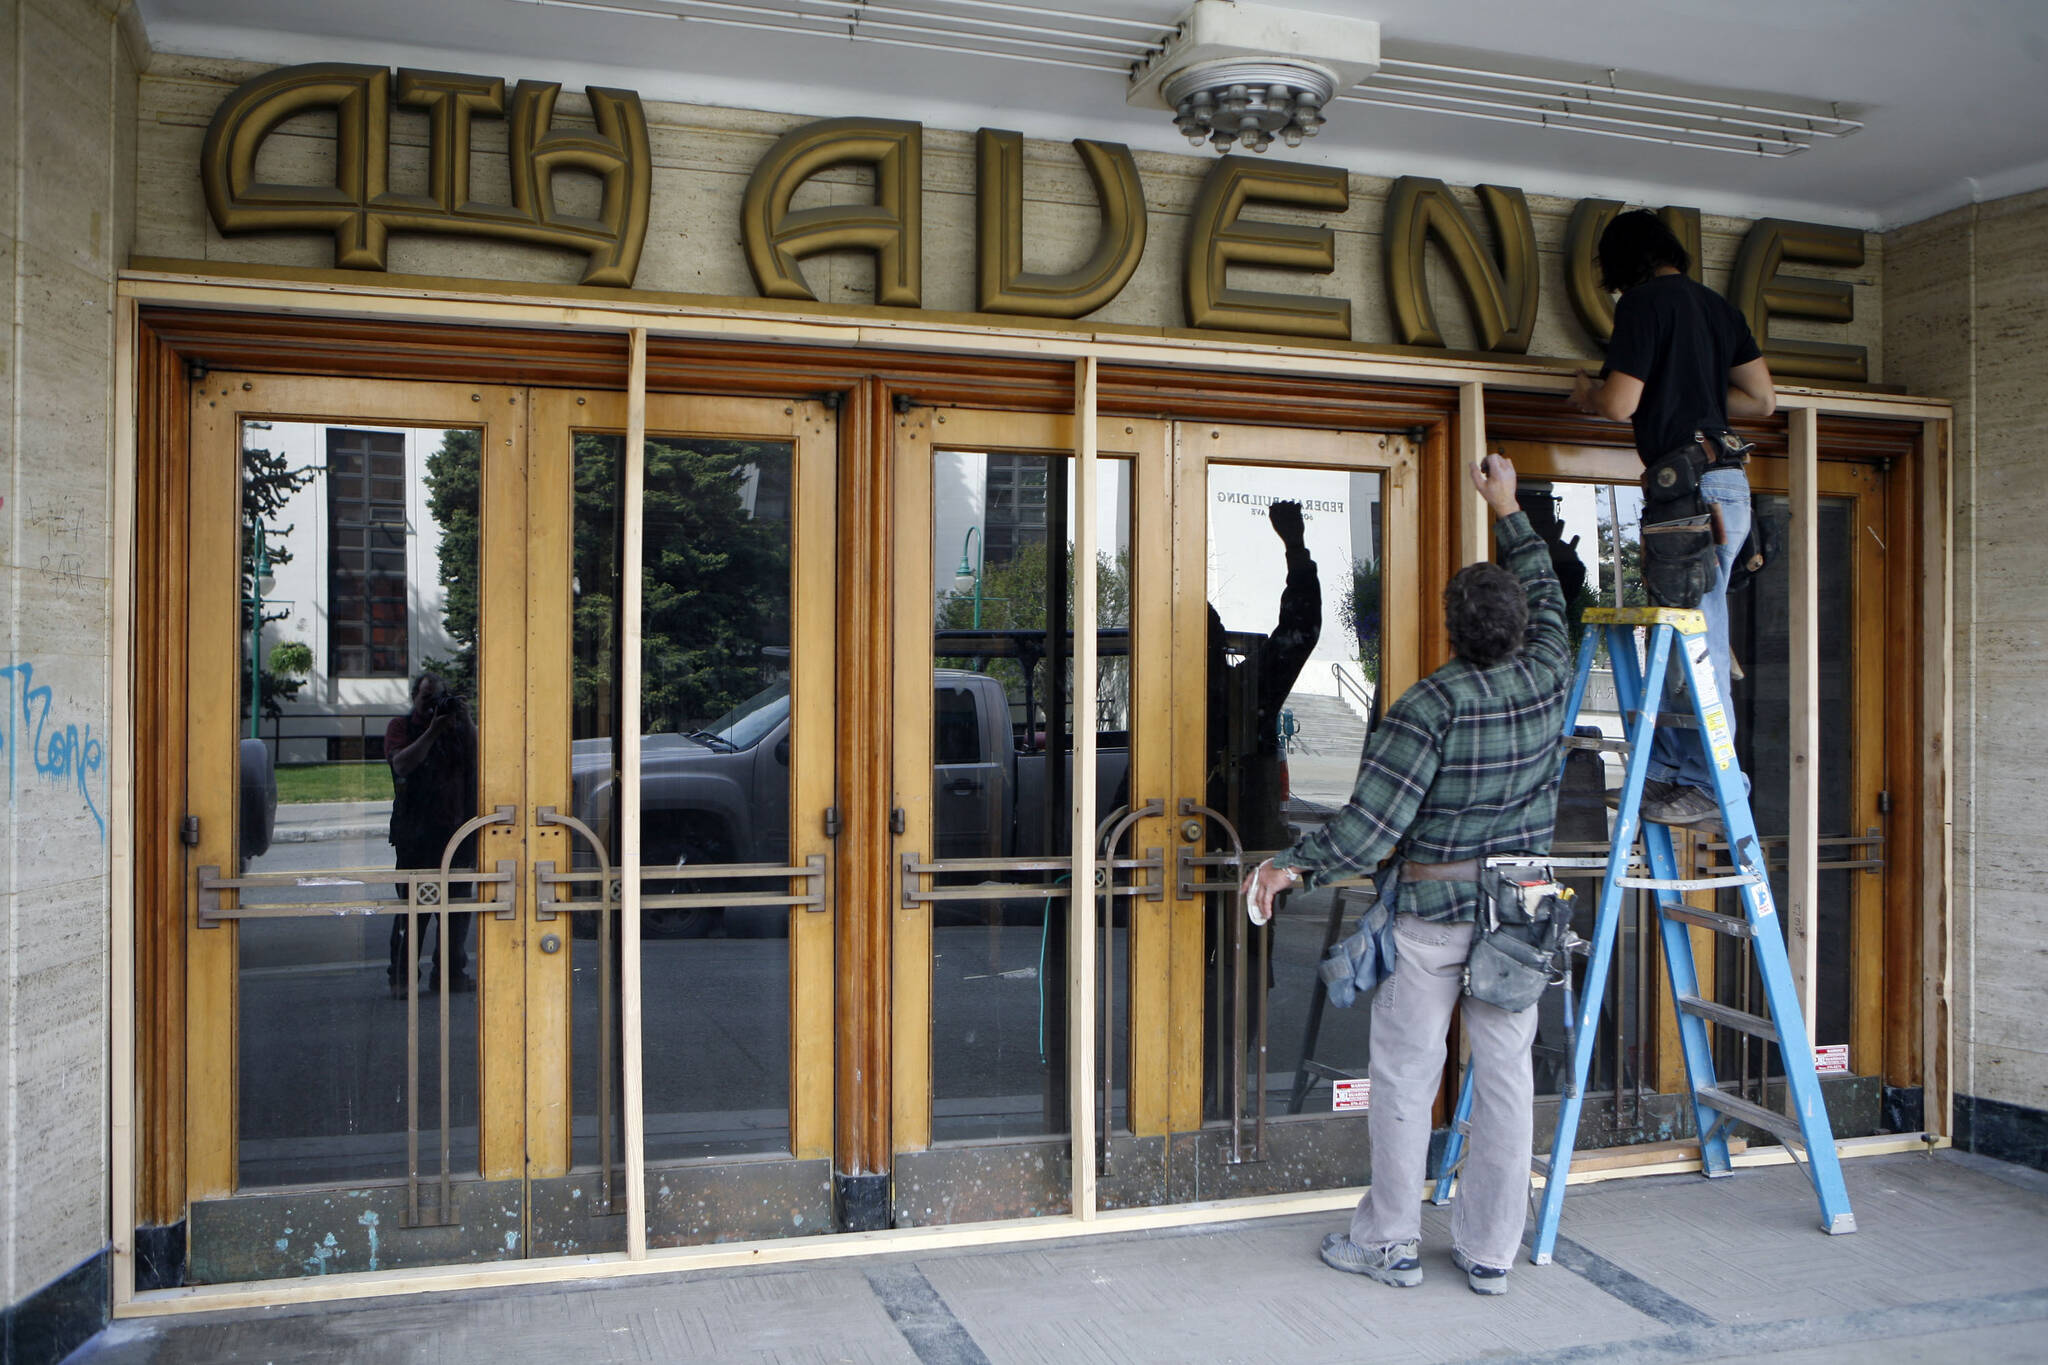 Jeff Griffin, left, and RC Edwardsen board up the 4th Avenue Theatre in downtown Anchorage, Alaska, on May 22, 2009. Demolition will begin in August 2022 on a once-opulent downtown Anchorage movie theater designed by the architect of Hollywood’s famed Pantages Theater. The 4th Avenue Theatre with nearly 1,000 seats opened in 1947, and it withstood the second most powerful earthquake ever recorded. (AP Photo/Al Grillo, File)